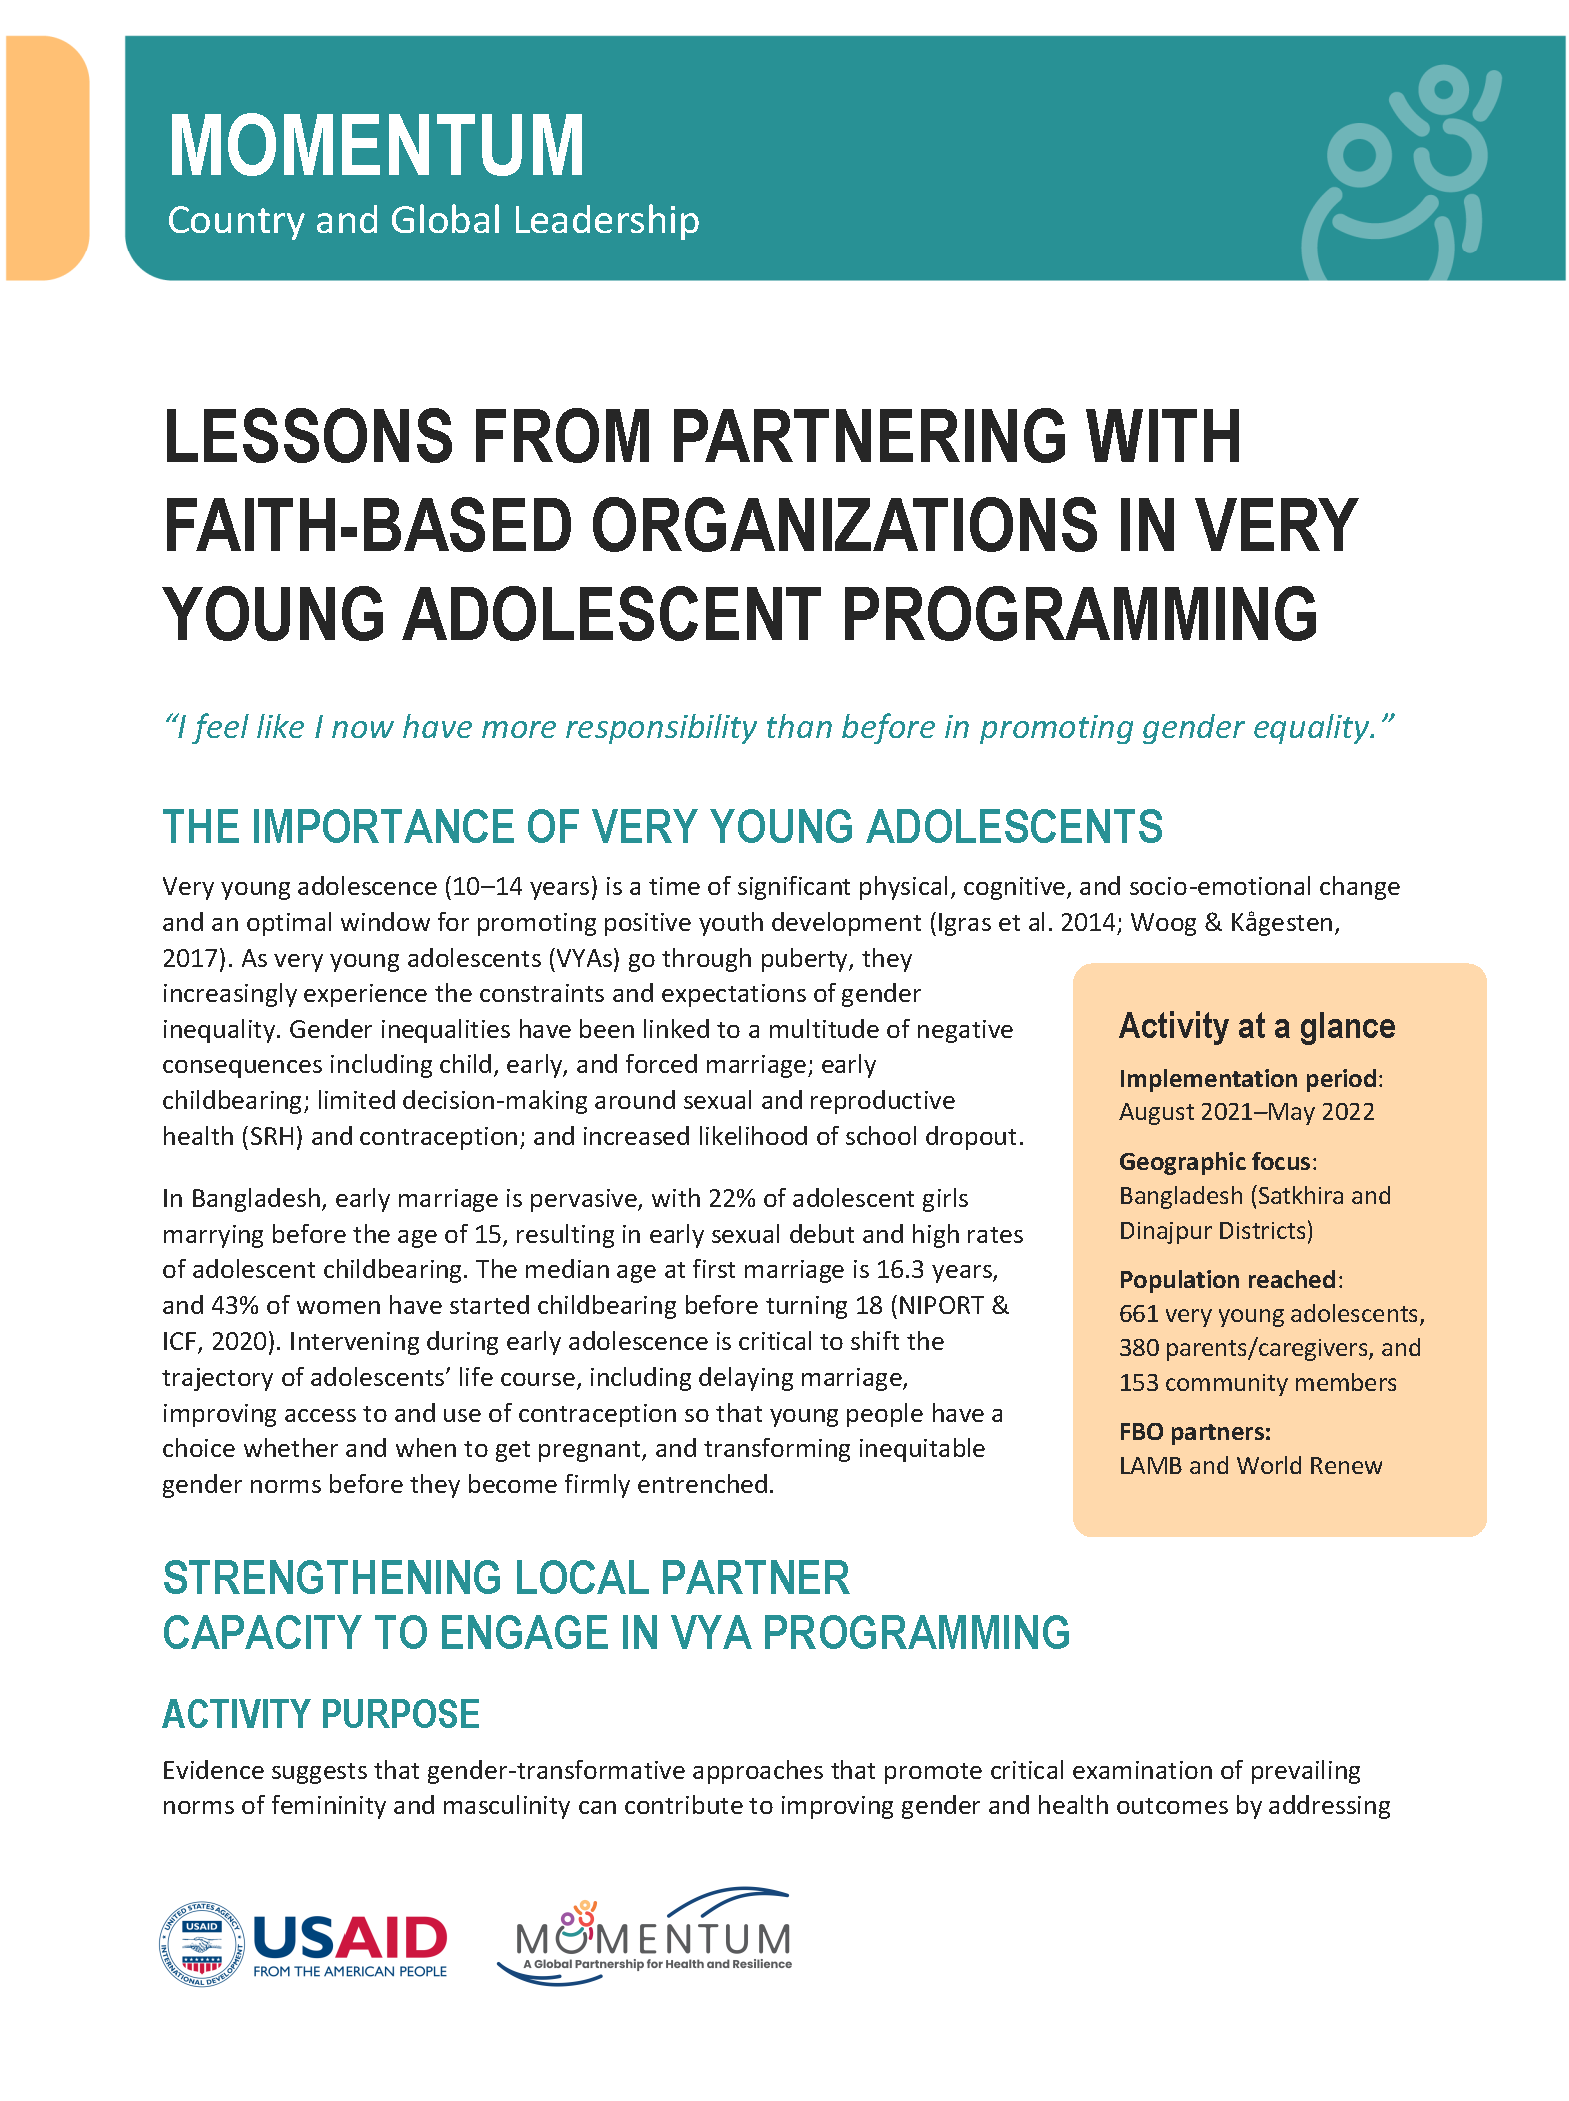 Lessons from Partnering with Faith-Based Organizations in Very Young Adolescent Programming